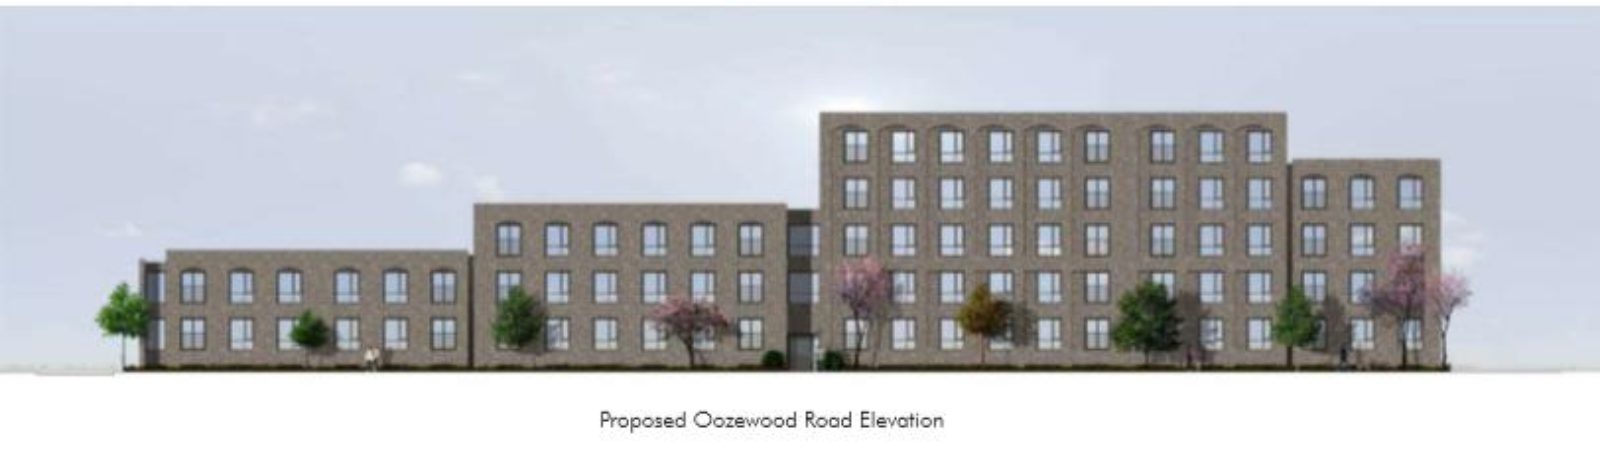 The Proposed Oozewood Road Elevation